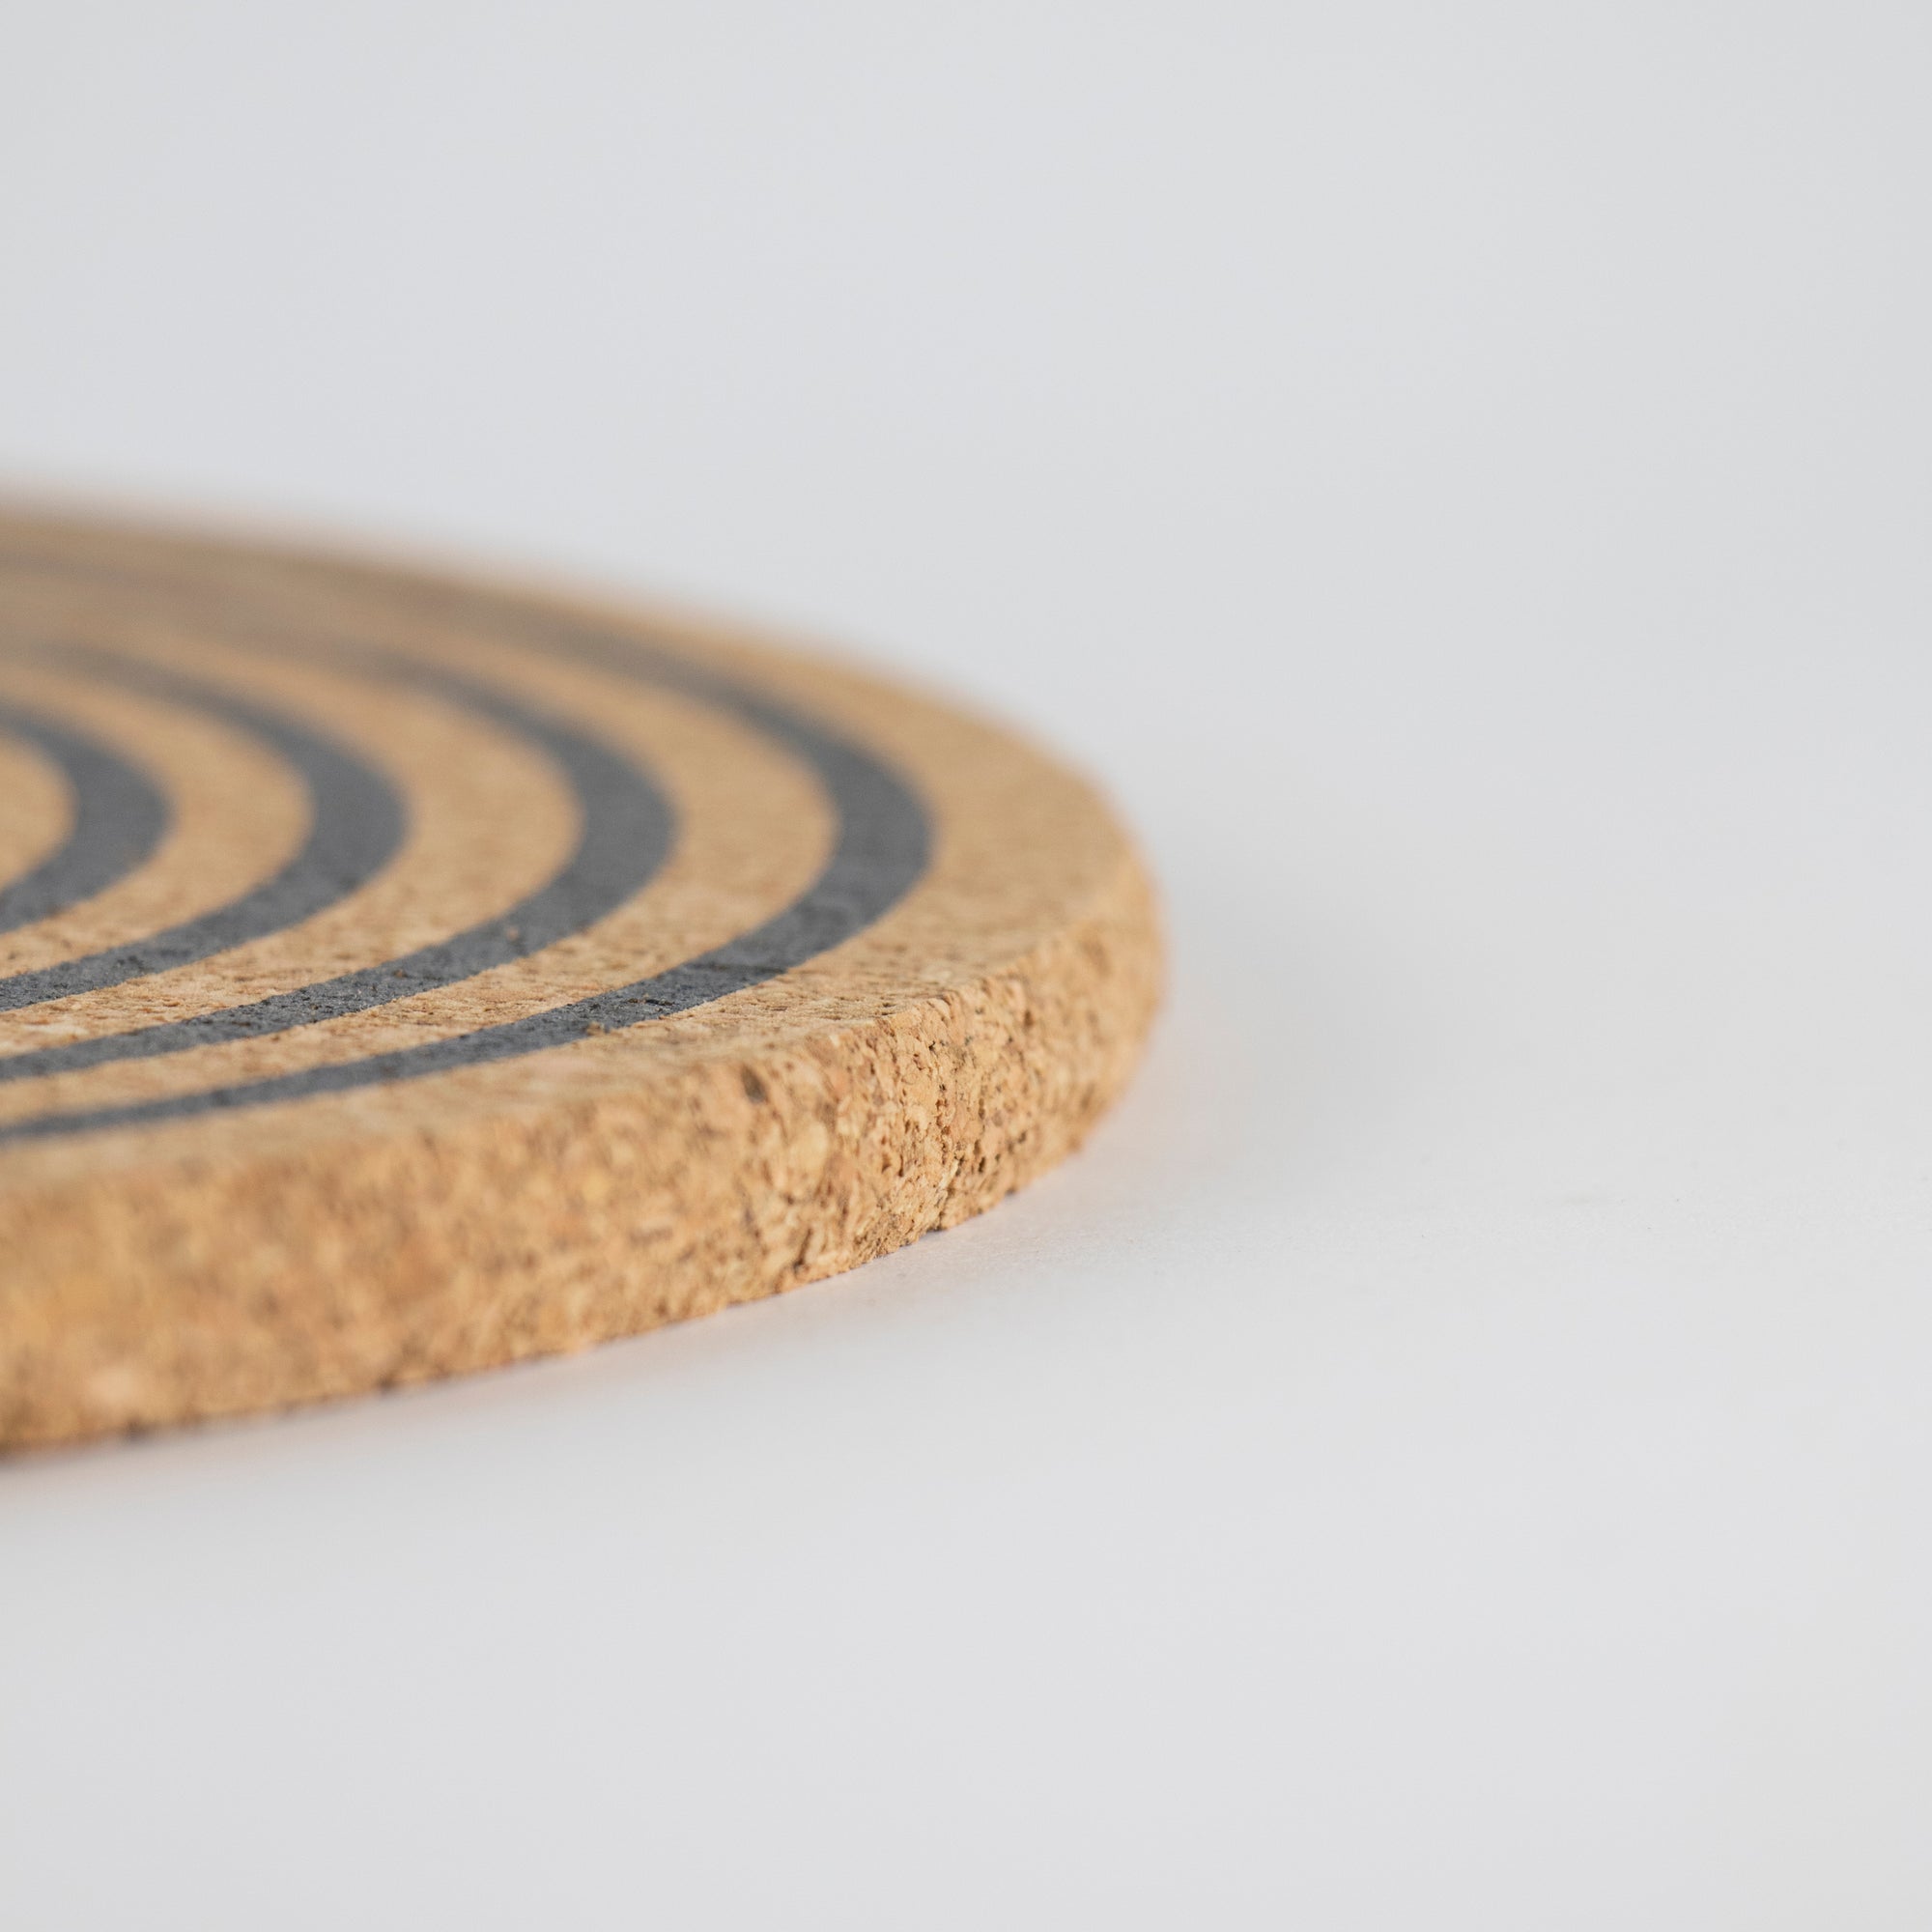 Sustainable cork placemat and coaster. Orbit design